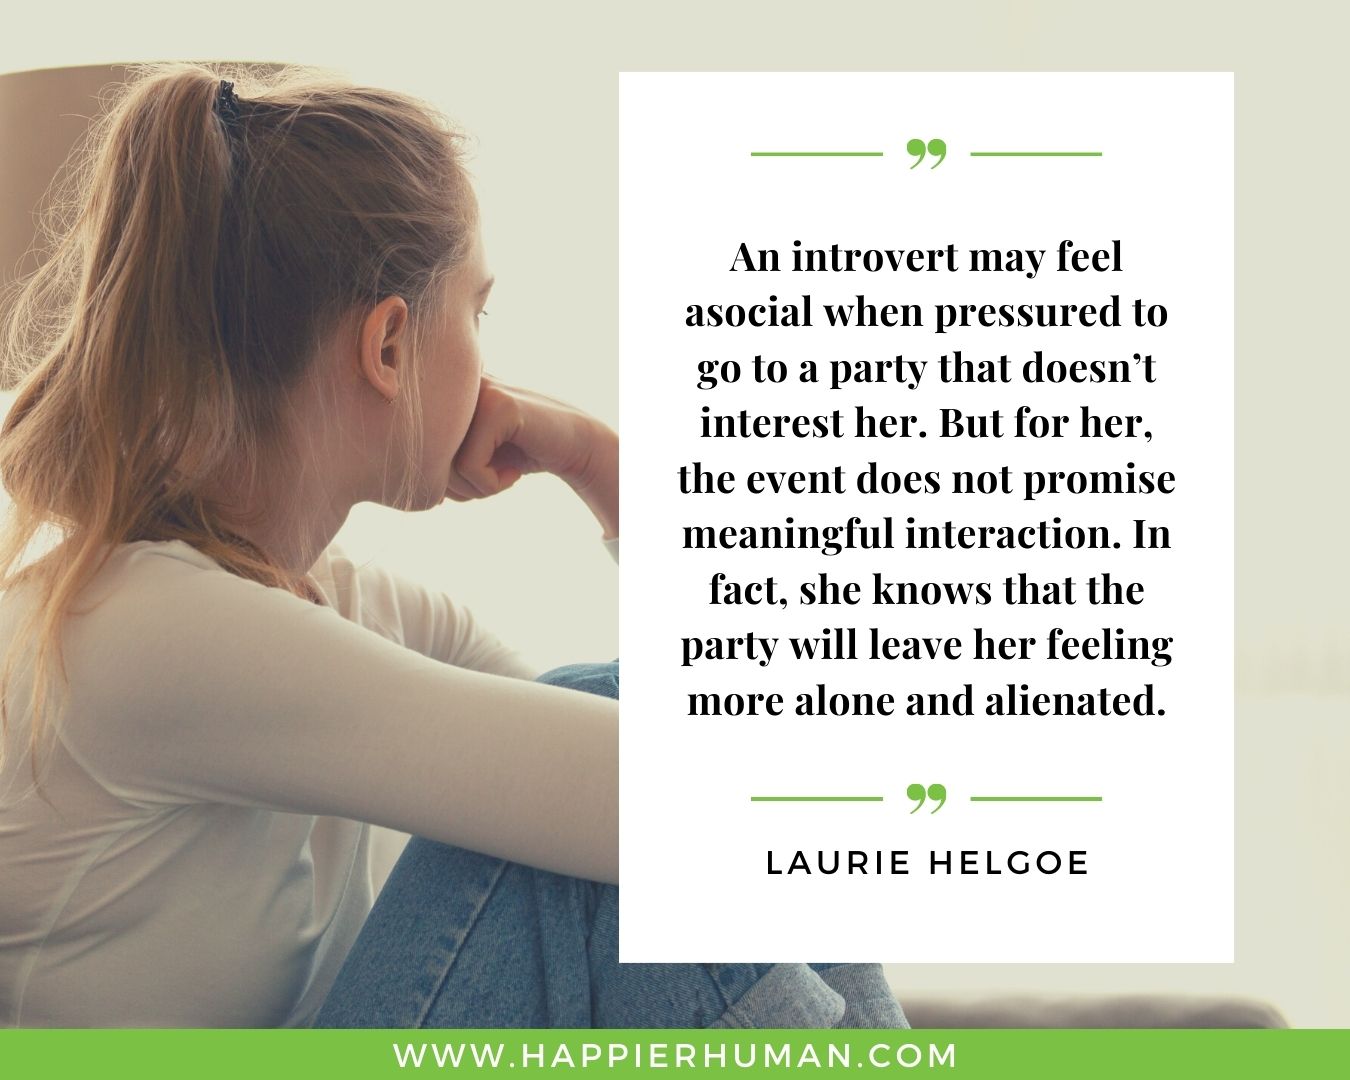 Introvert Quotes - “An introvert may feel asocial when pressured to go to a party that doesn’t interest her. But for her, the event does not promise meaningful interaction. In fact, she knows that the party will leave her feeling more alone and alienated.” – Laurie Helgoe